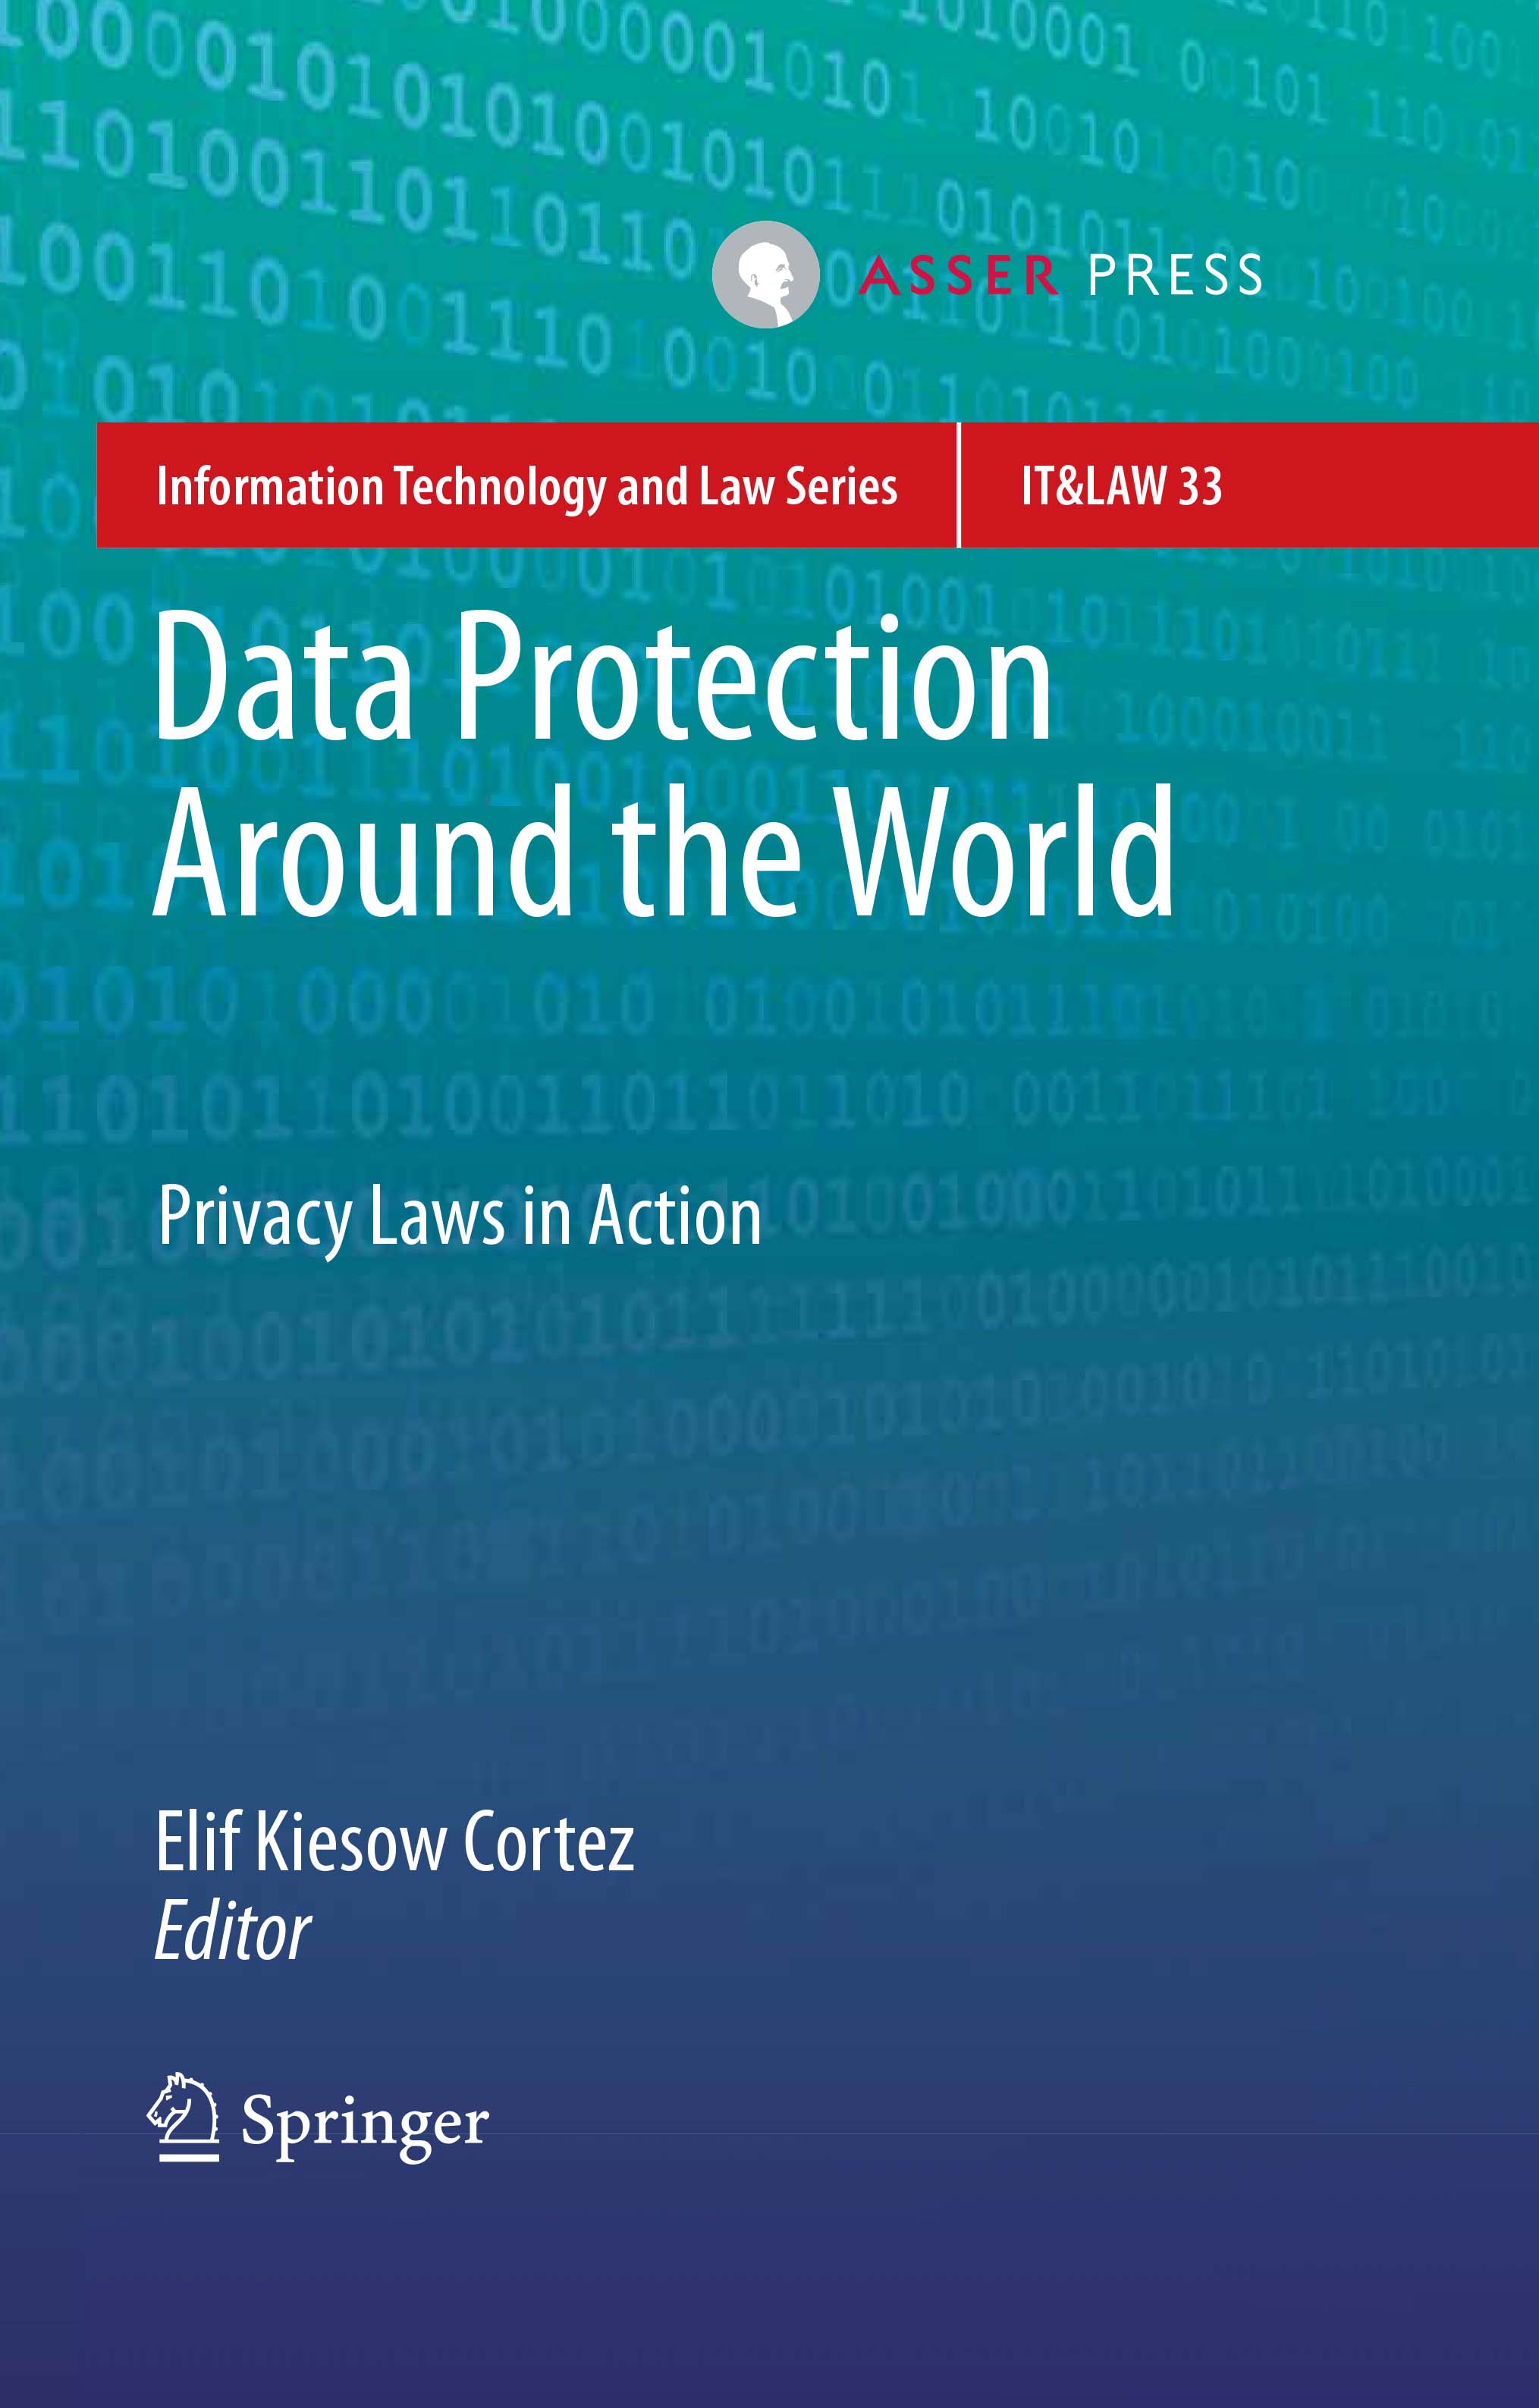 Data Protection Around the World - Privacy Laws in Action